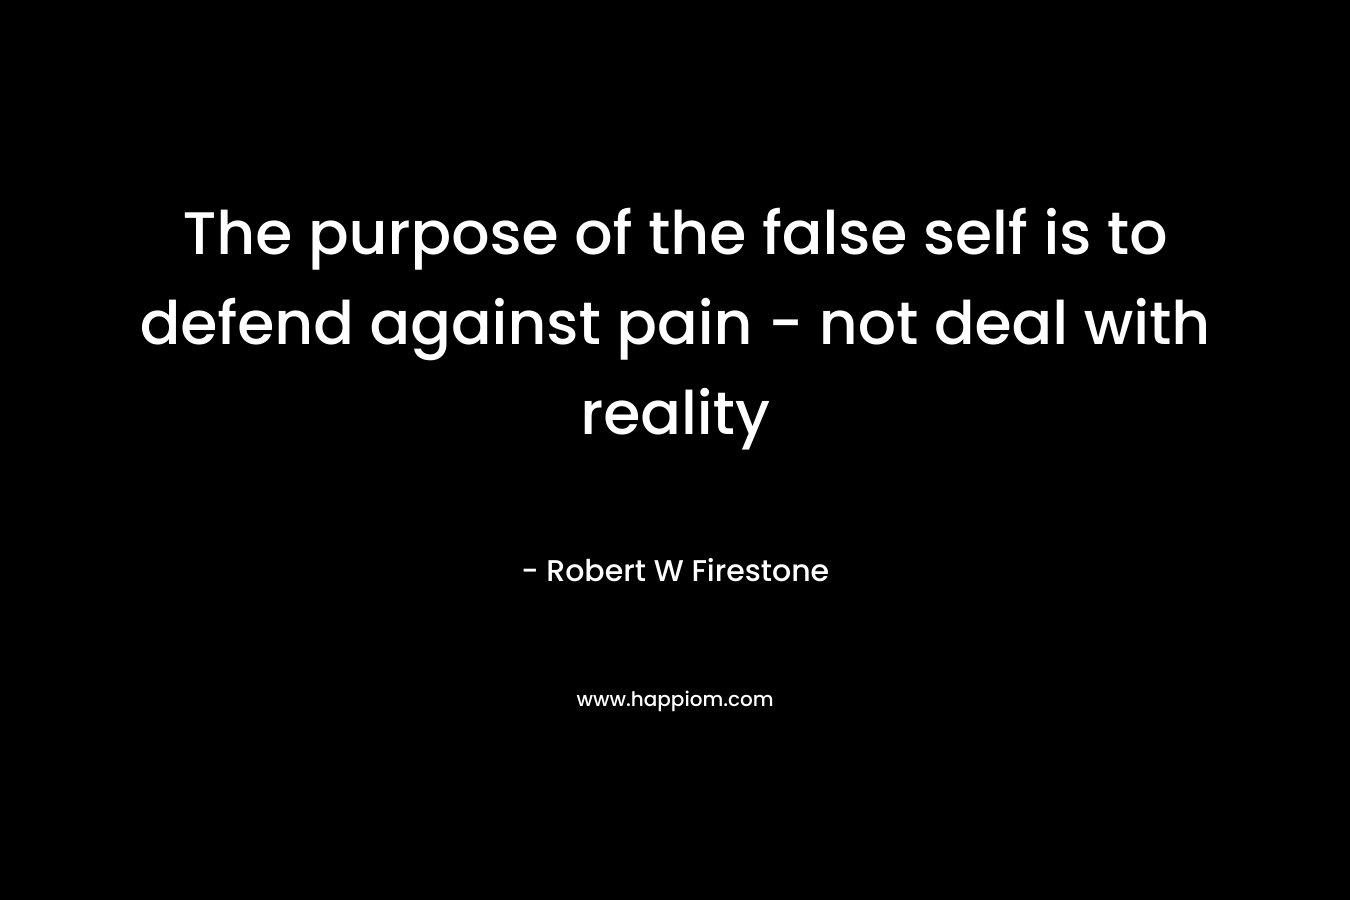 The purpose of the false self is to defend against pain - not deal with reality